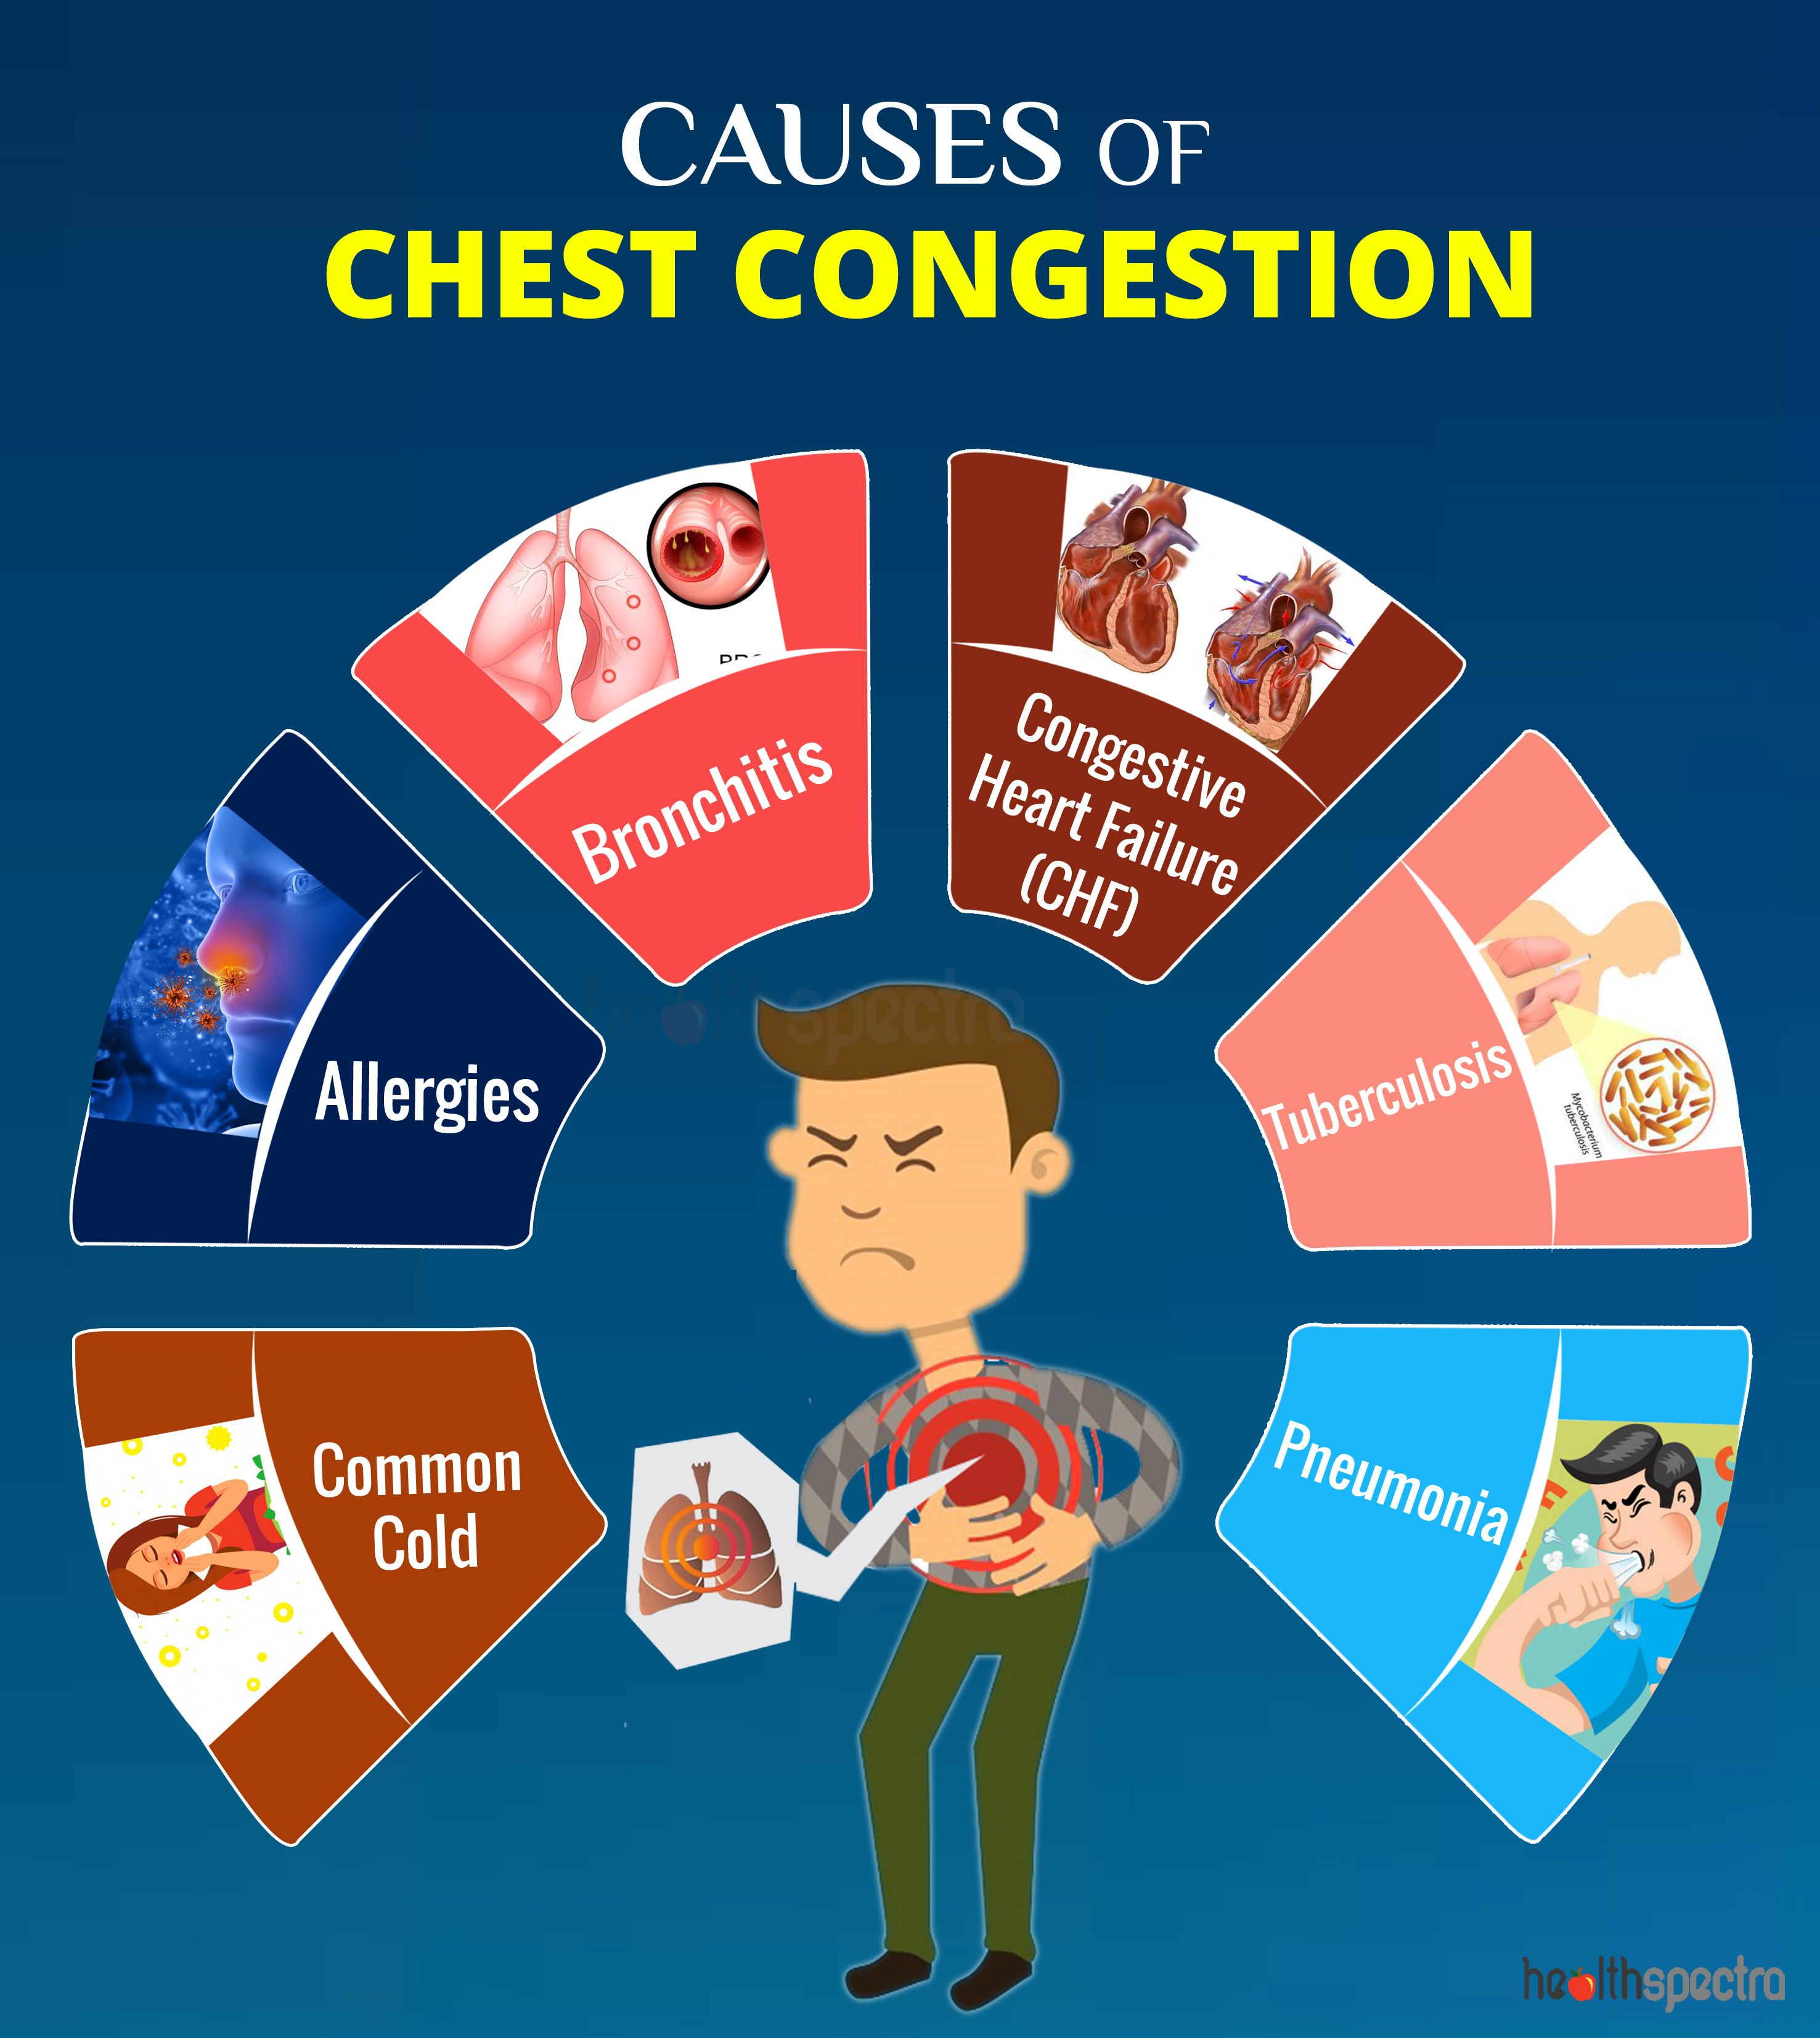 Causes of Chest Congestion